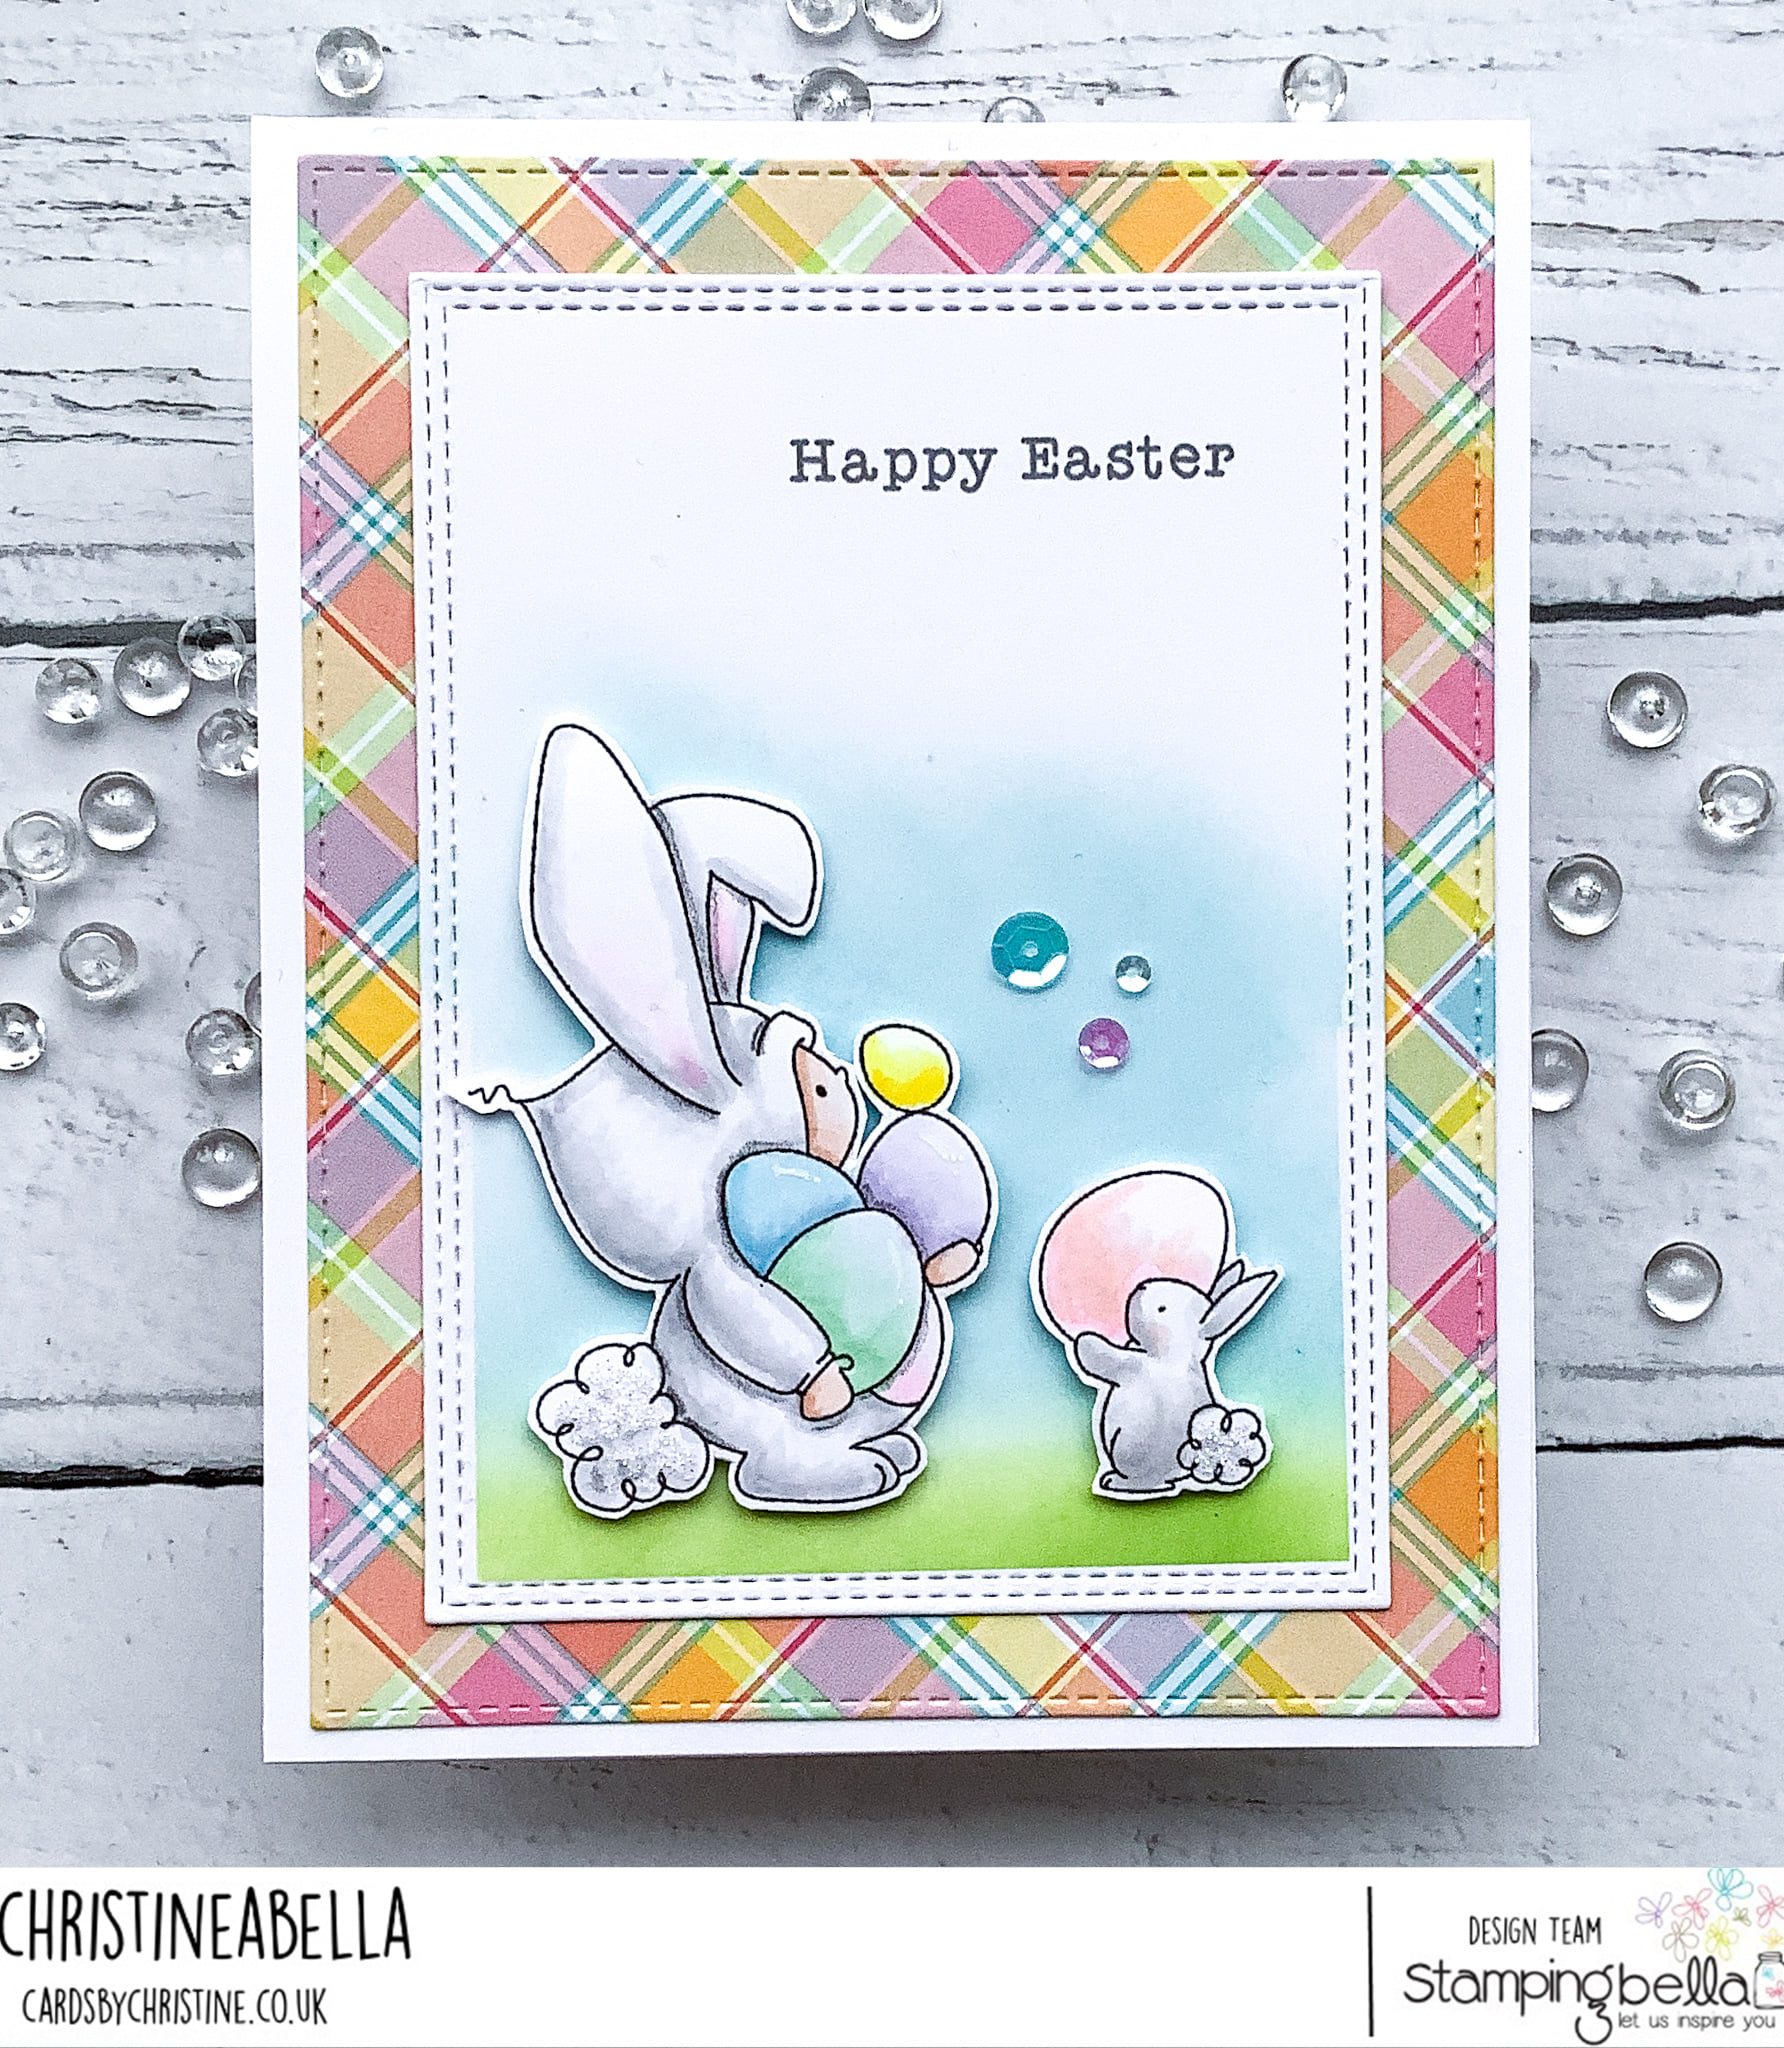 www.stampingbella.com: rubber stamp used : BUNDLE GIRL BUNNY card by Christine LEvison